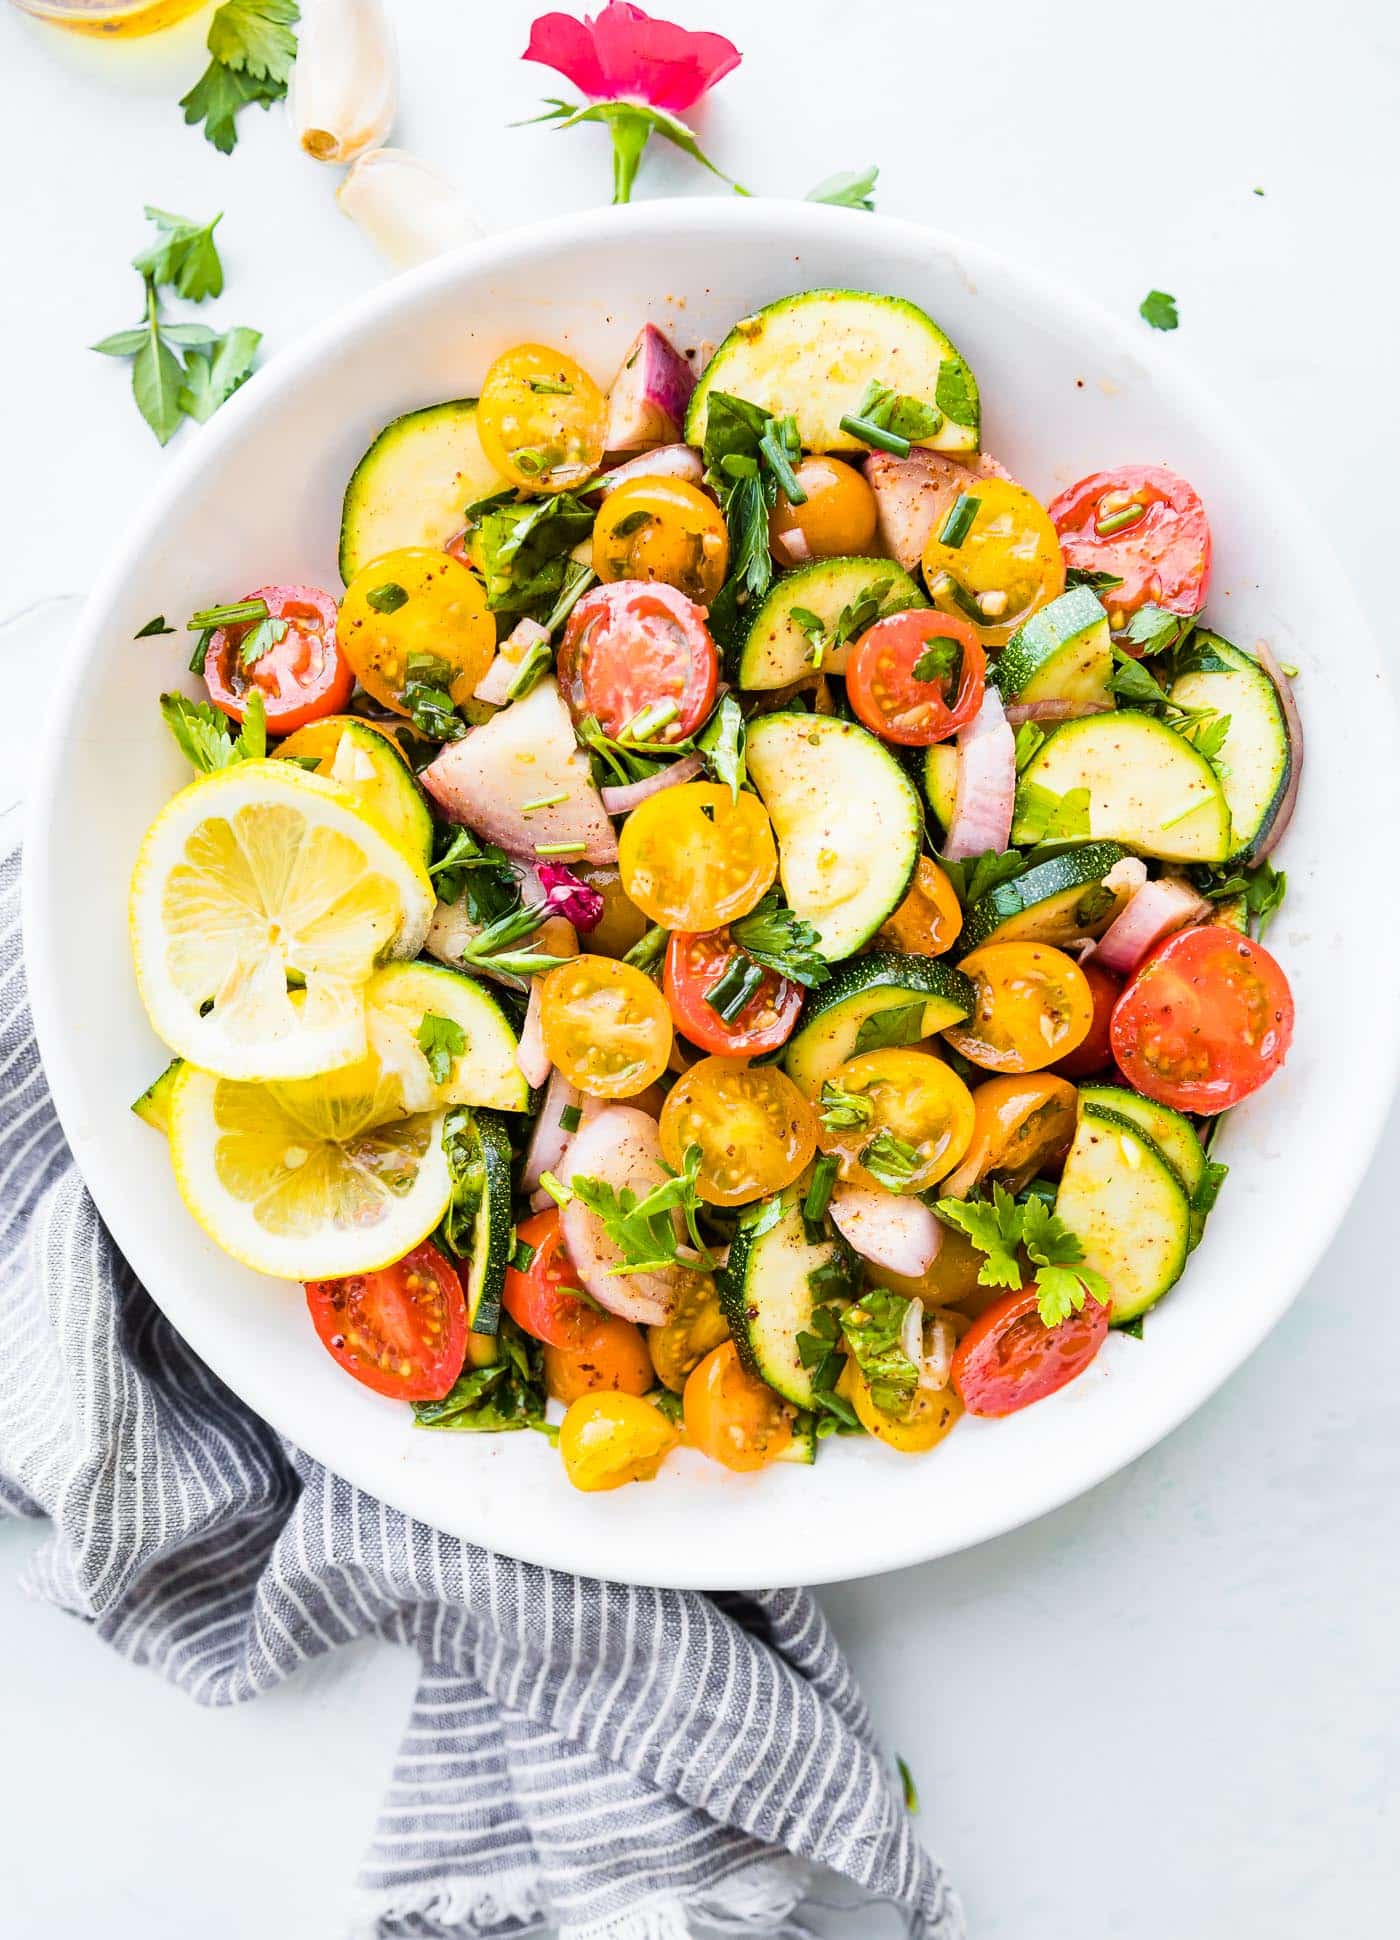 healthy marinated vegetables salad with tomatoes and zucchini in white bowl.